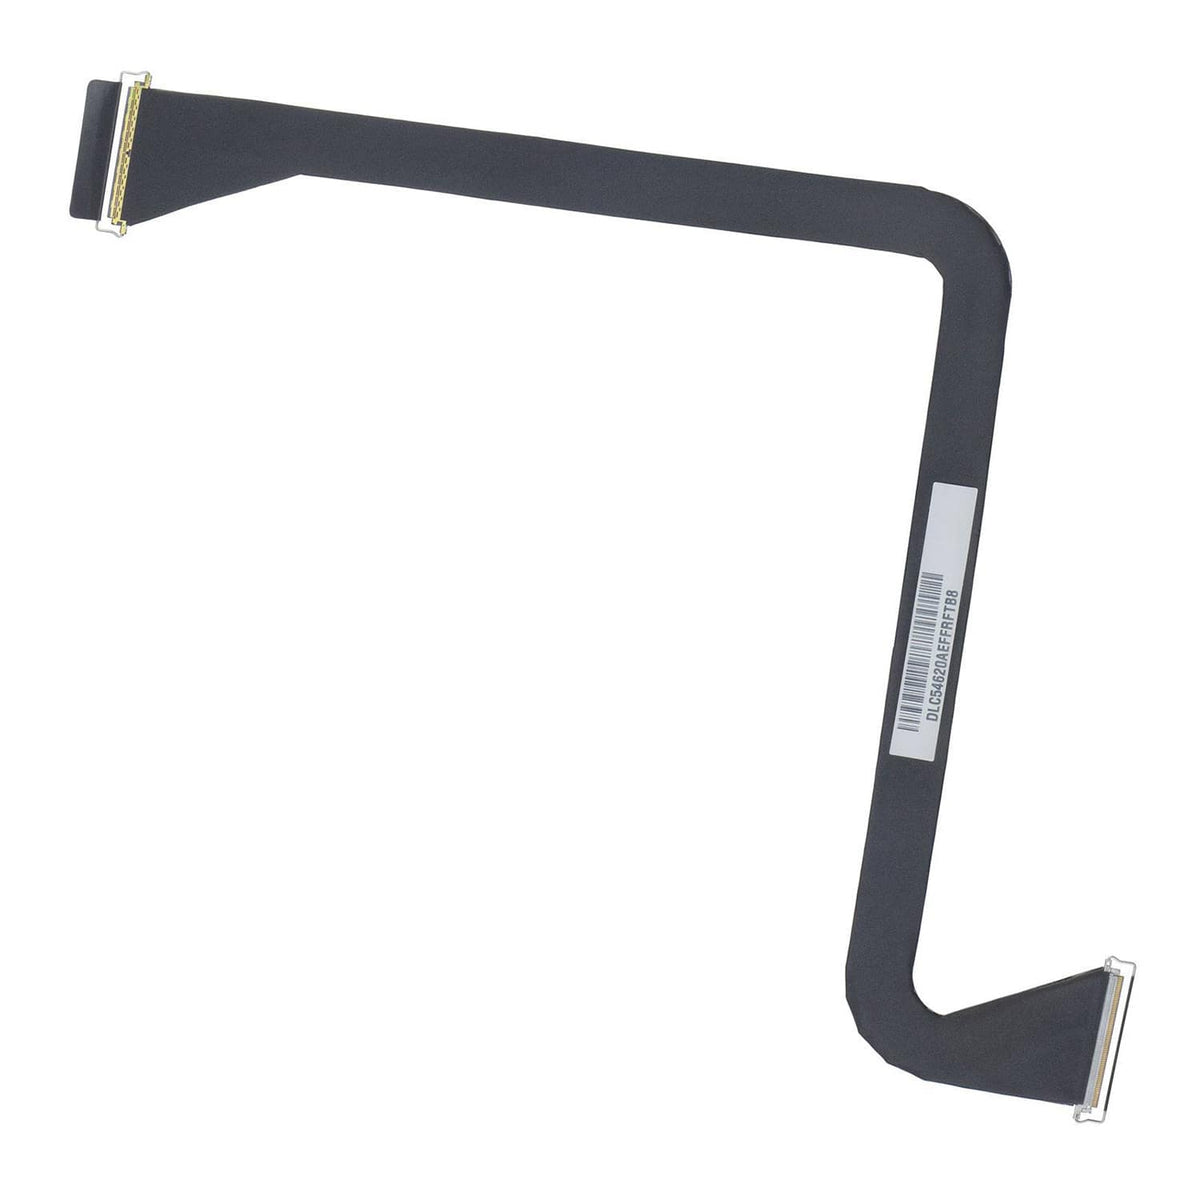 LCD DISPLAY EDP CABLE FOR IMAC 27" A1419 (LATE 2015) 923-01087